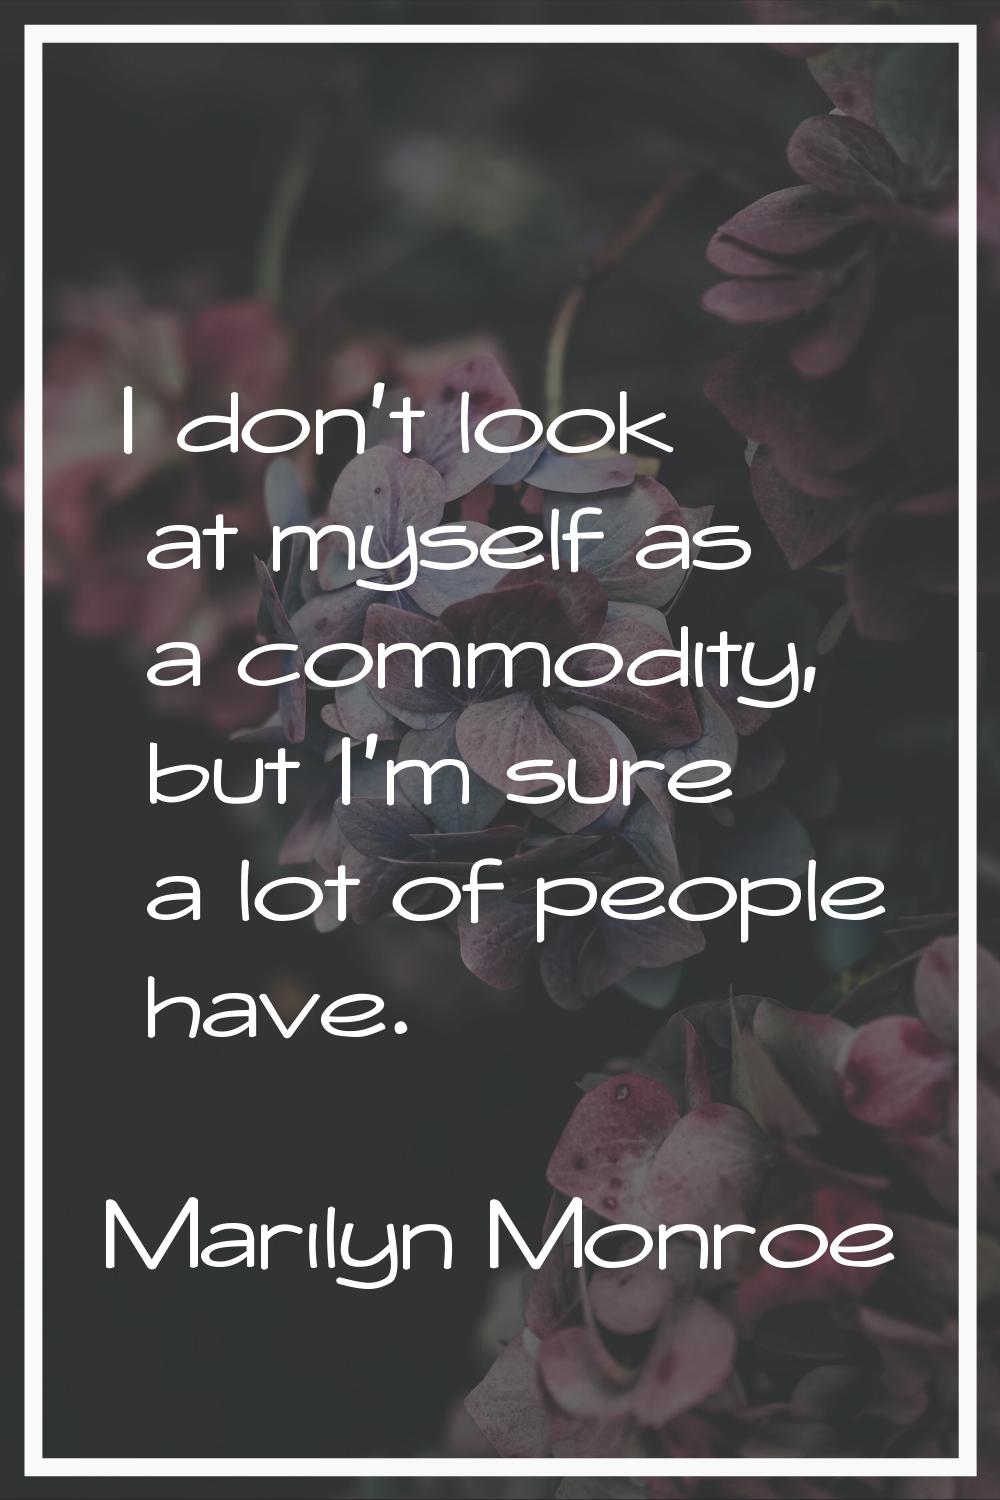 I don't look at myself as a commodity, but I'm sure a lot of people have.